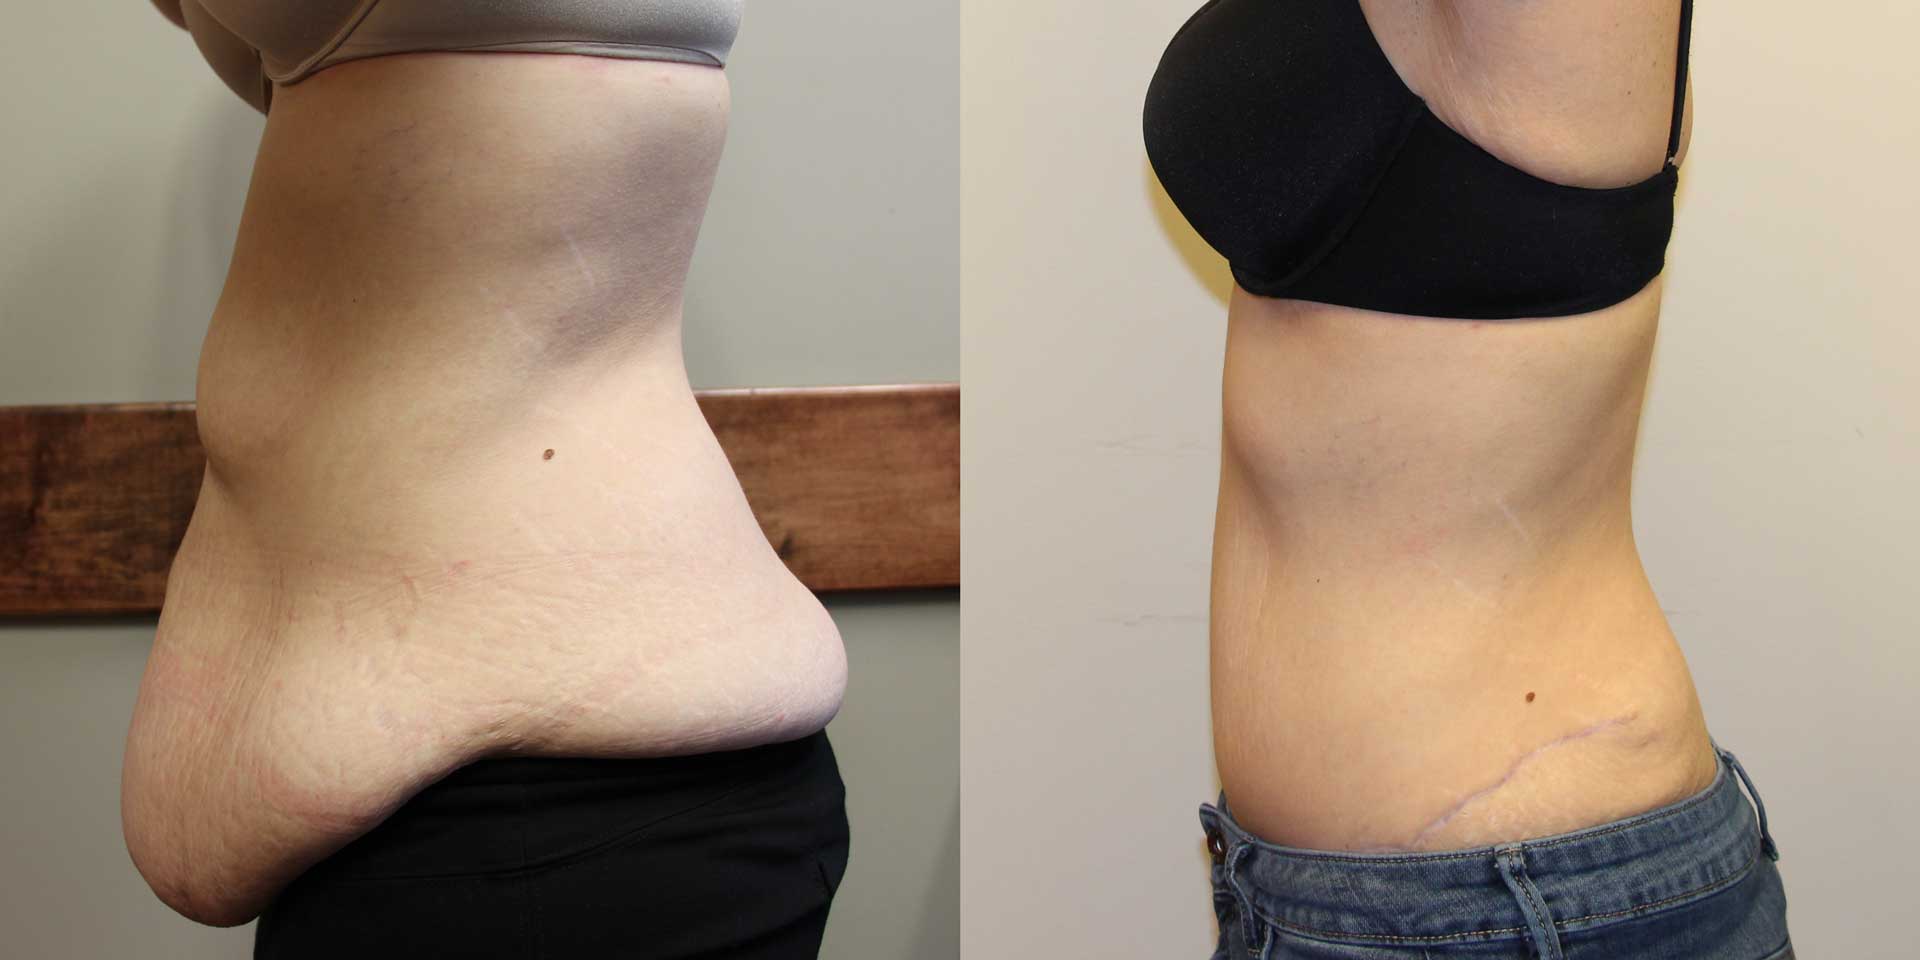 Tummy Tuck (Abdominoplasty) Before And After Photos